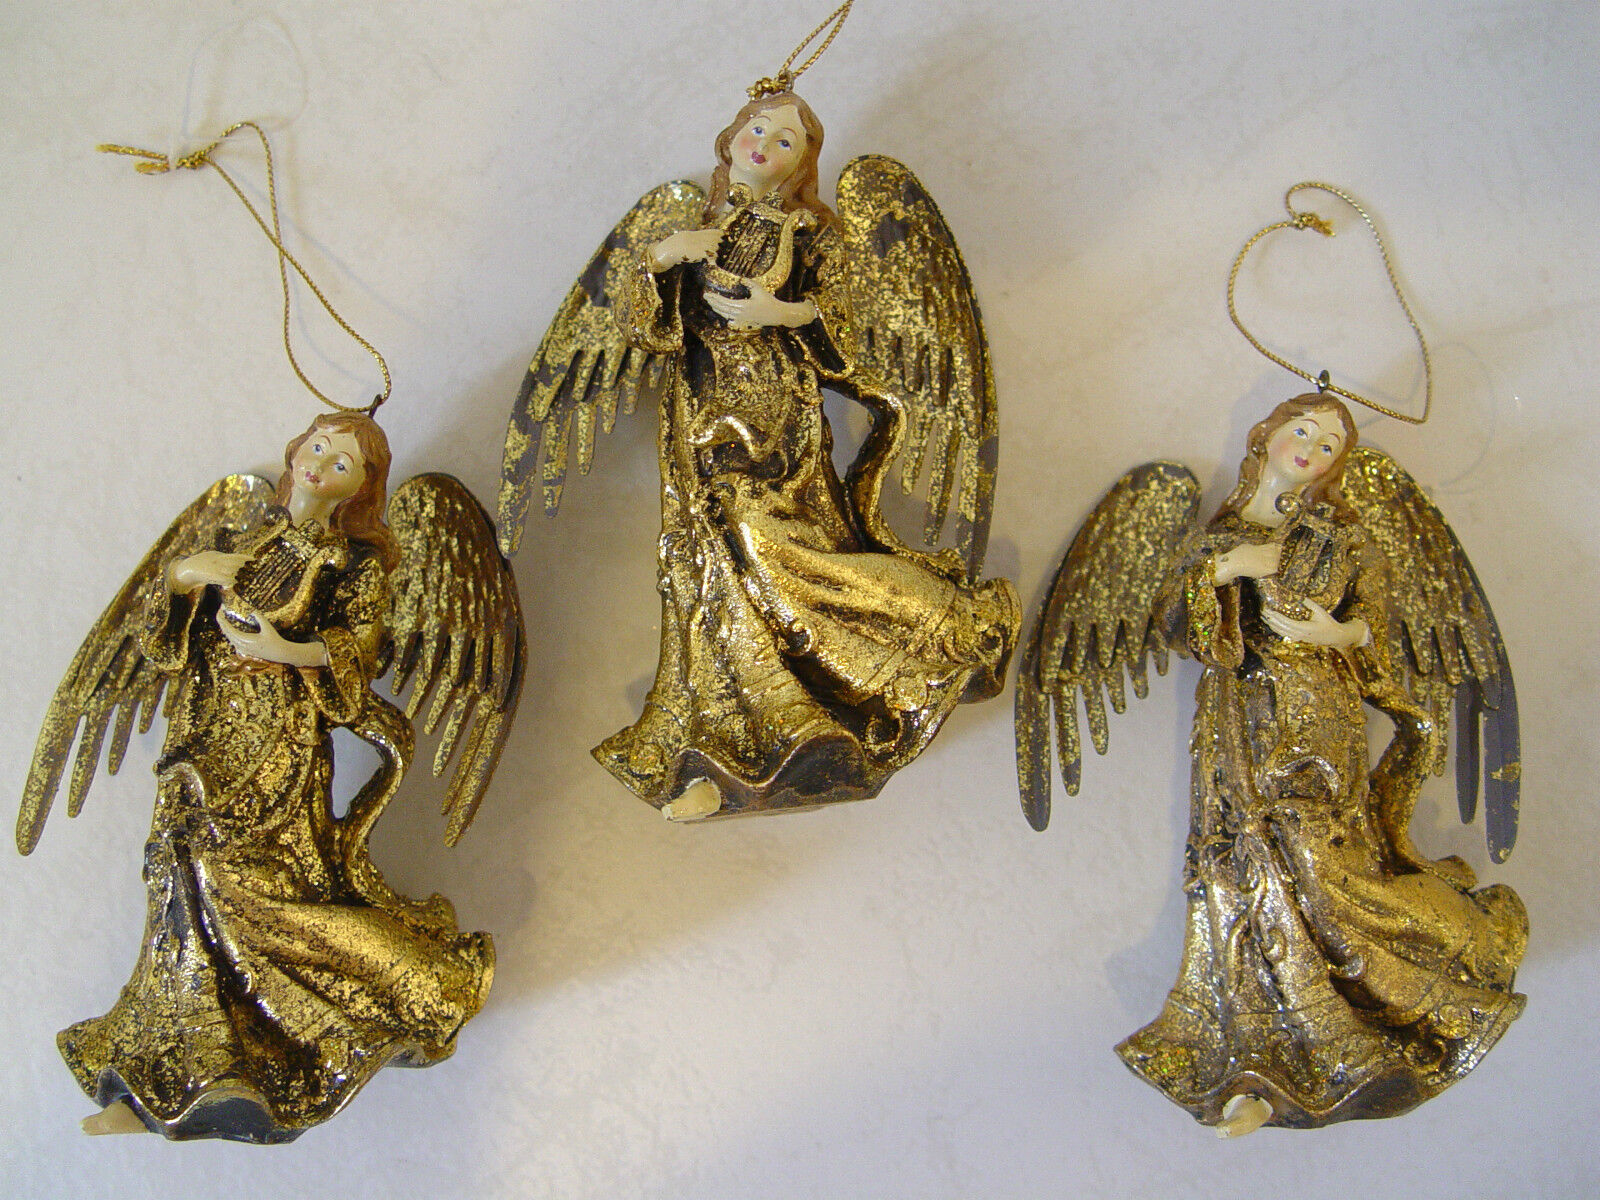 3 NEW GOLD ANGEL PLAYING LYRE ORNAMENTS ANGELS HANGING TREE ORNAMENT